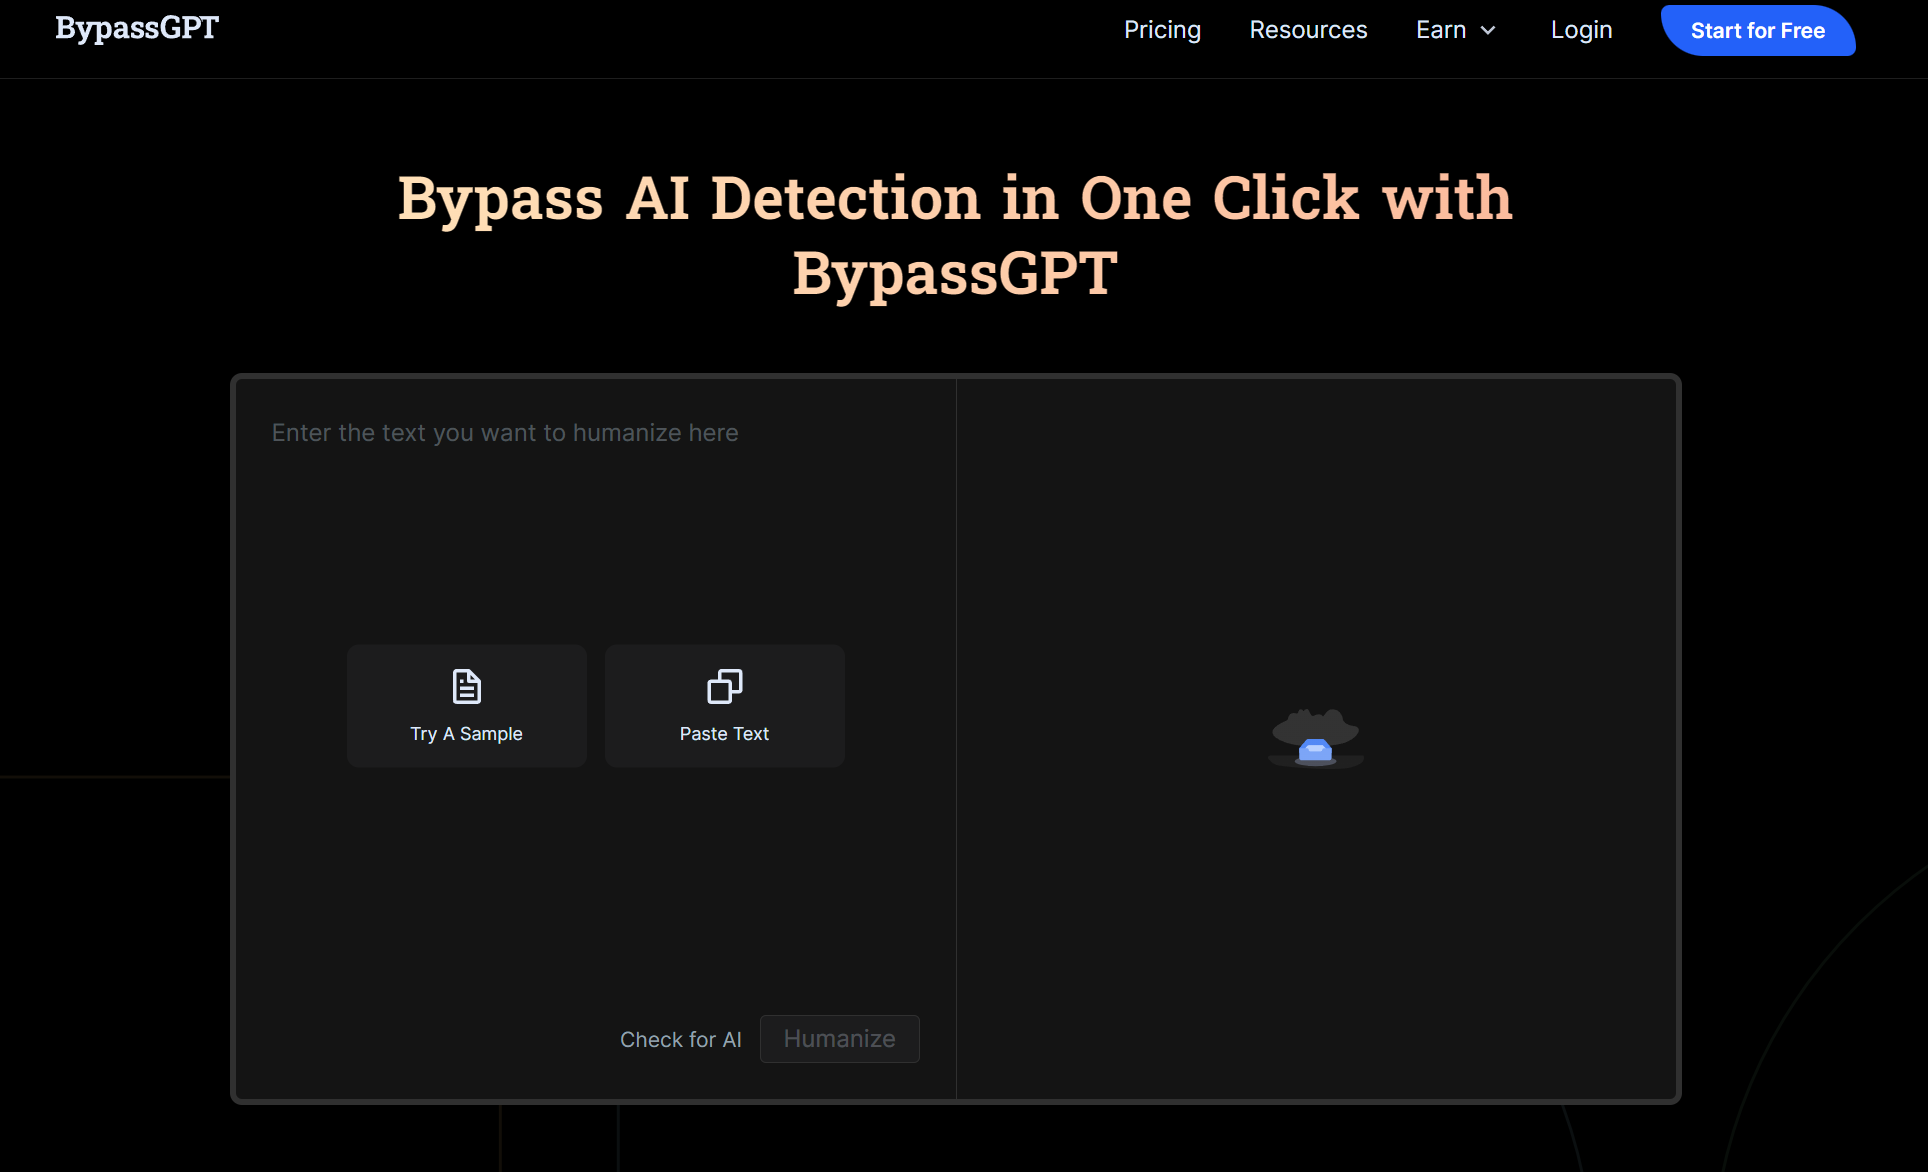 Bypass GPT – The AI Humanizer